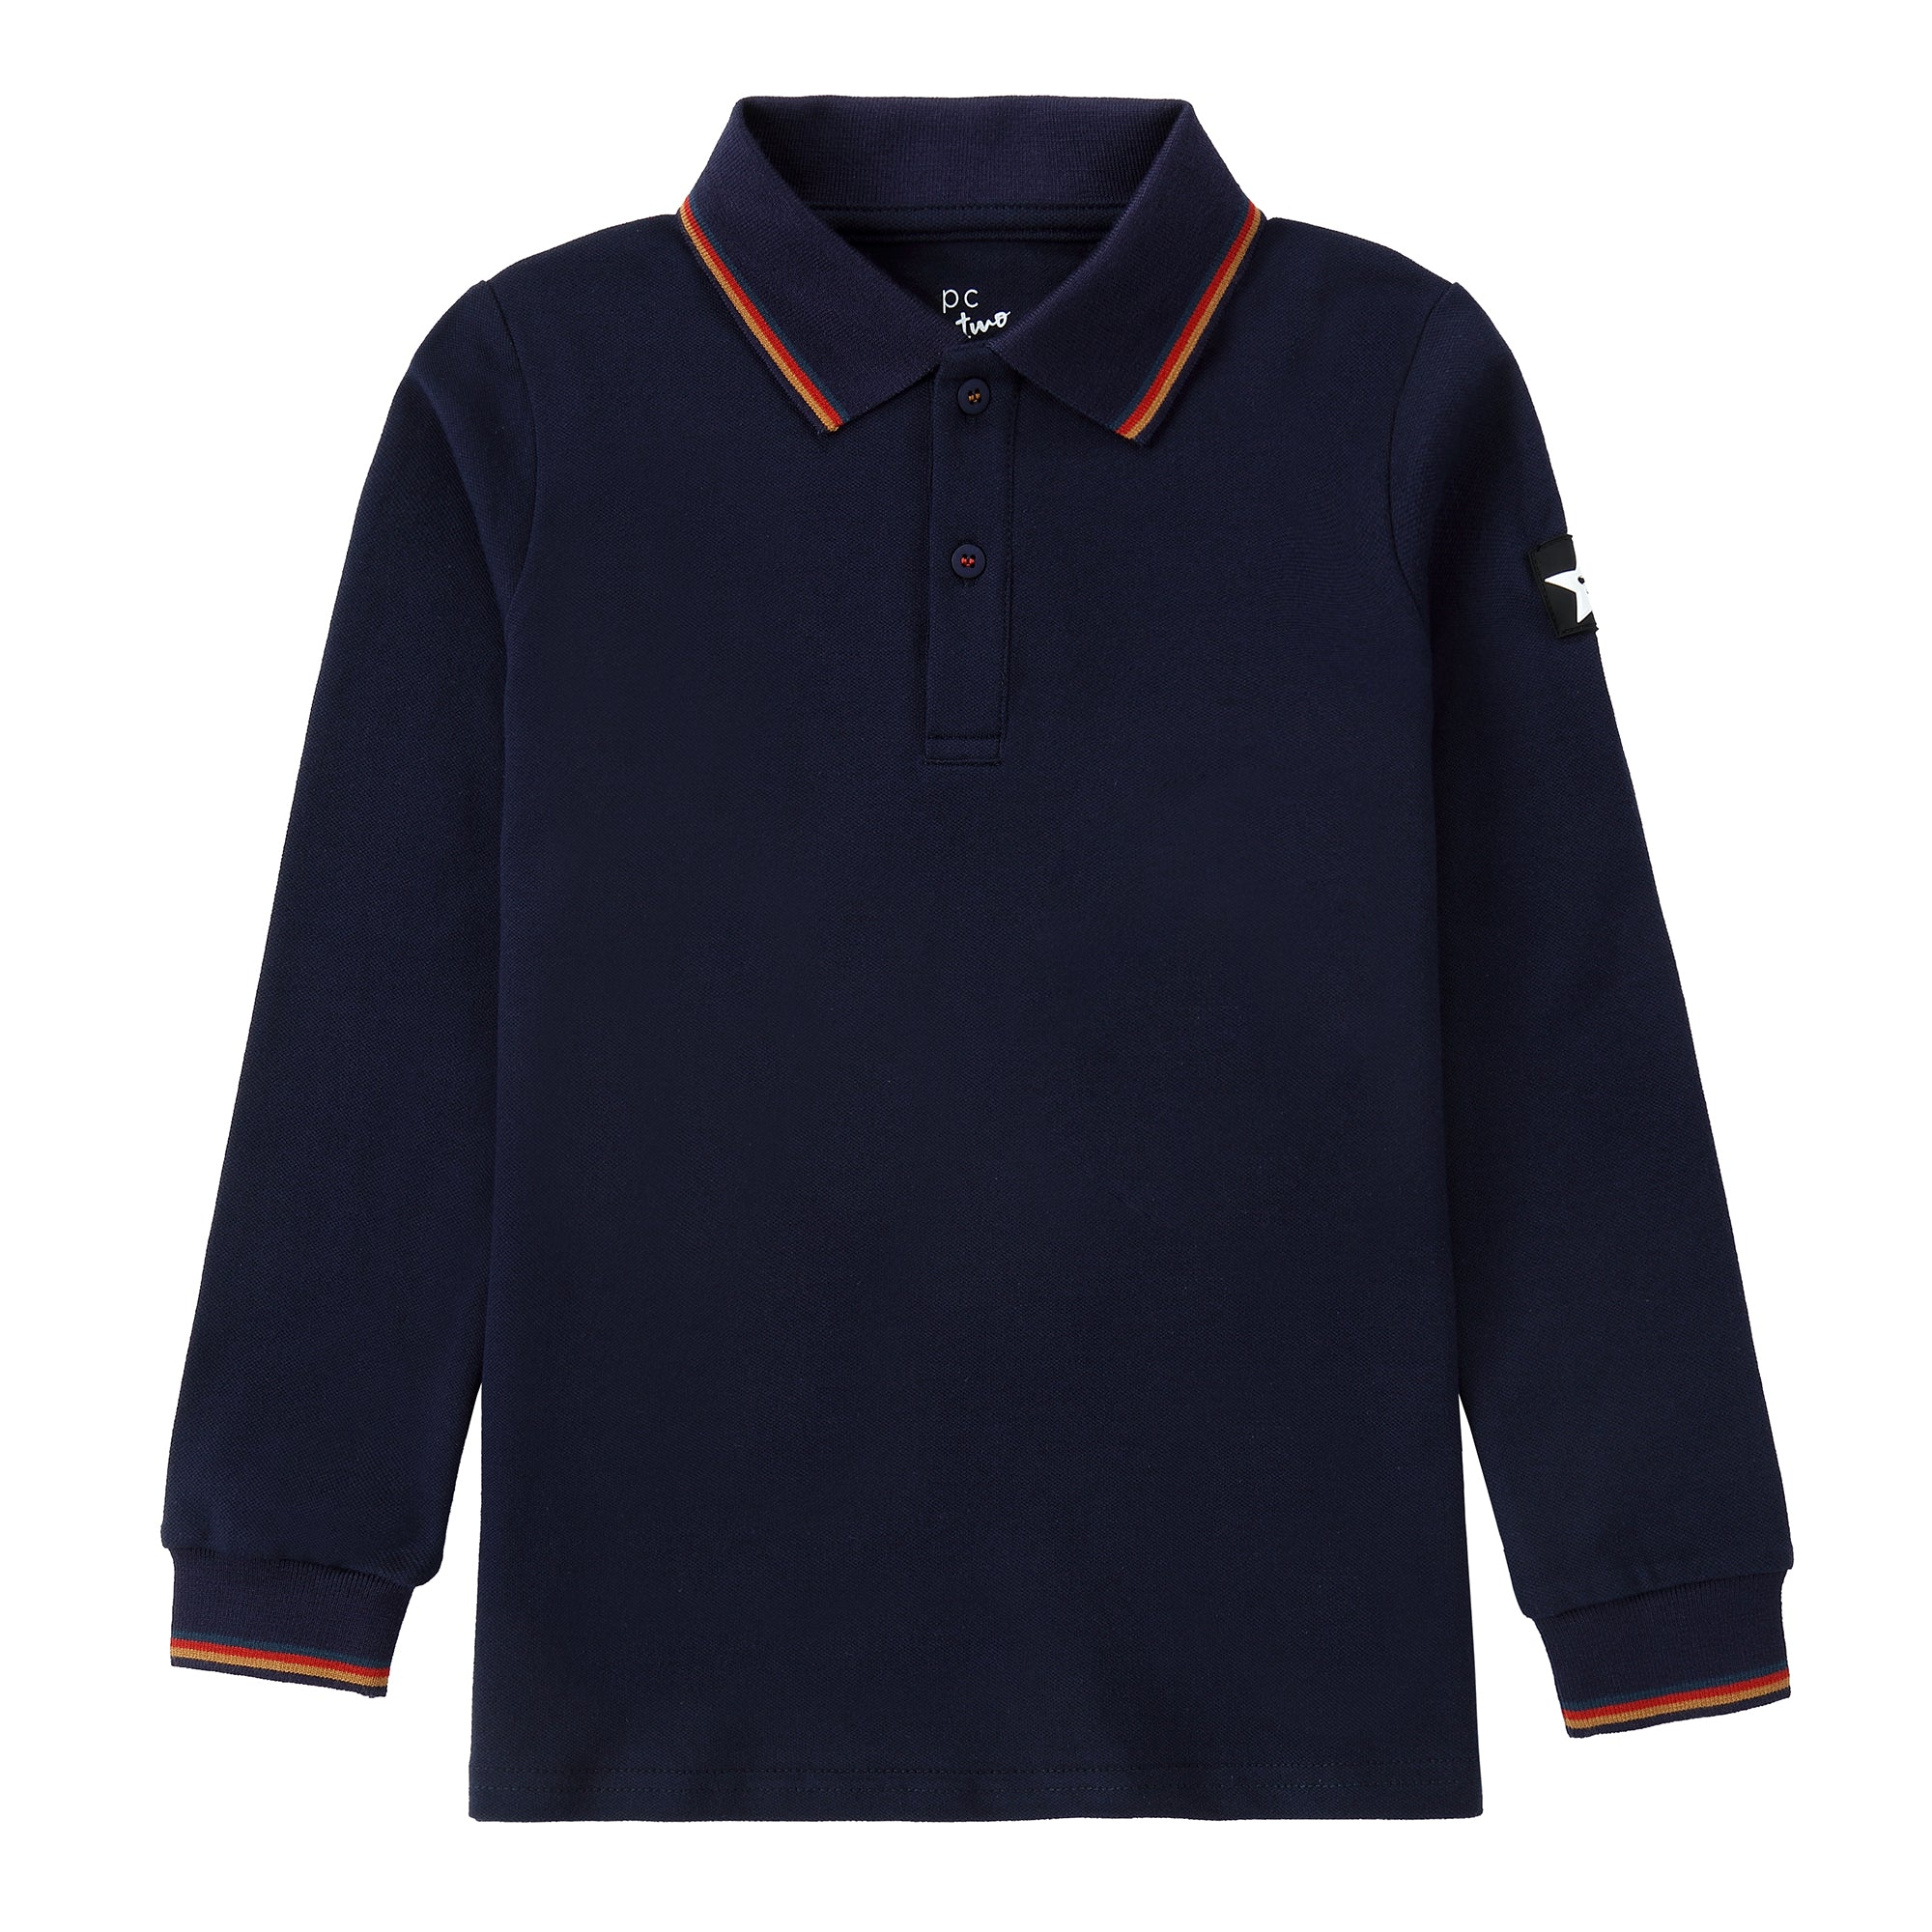 Navy Blue Polo With Colorful Stripe Details